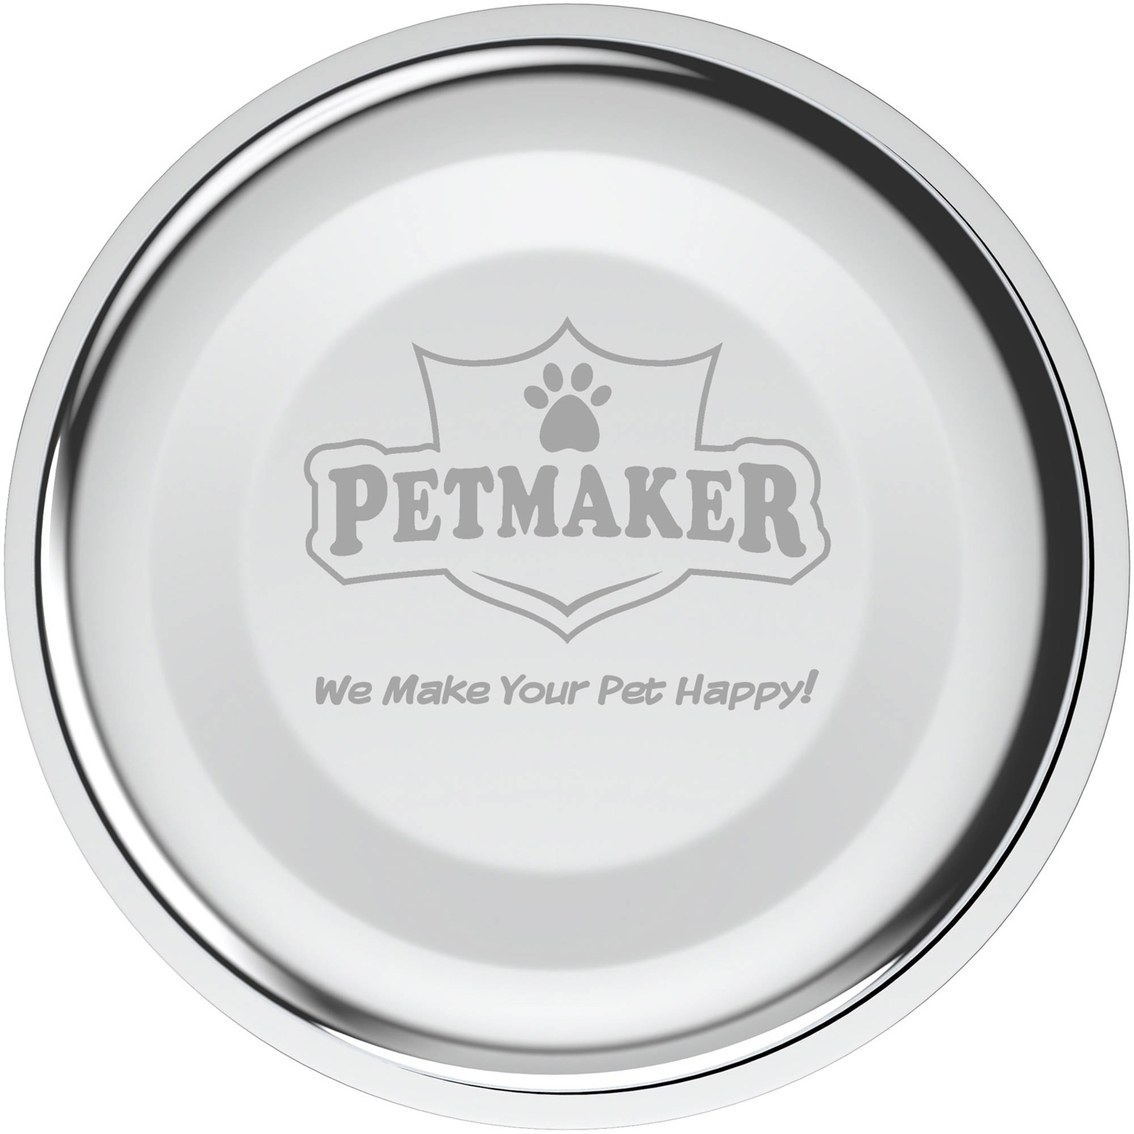 Petmaker Stainless Steel Hanging Pet Bowls Set of 2 - Image 6 of 8